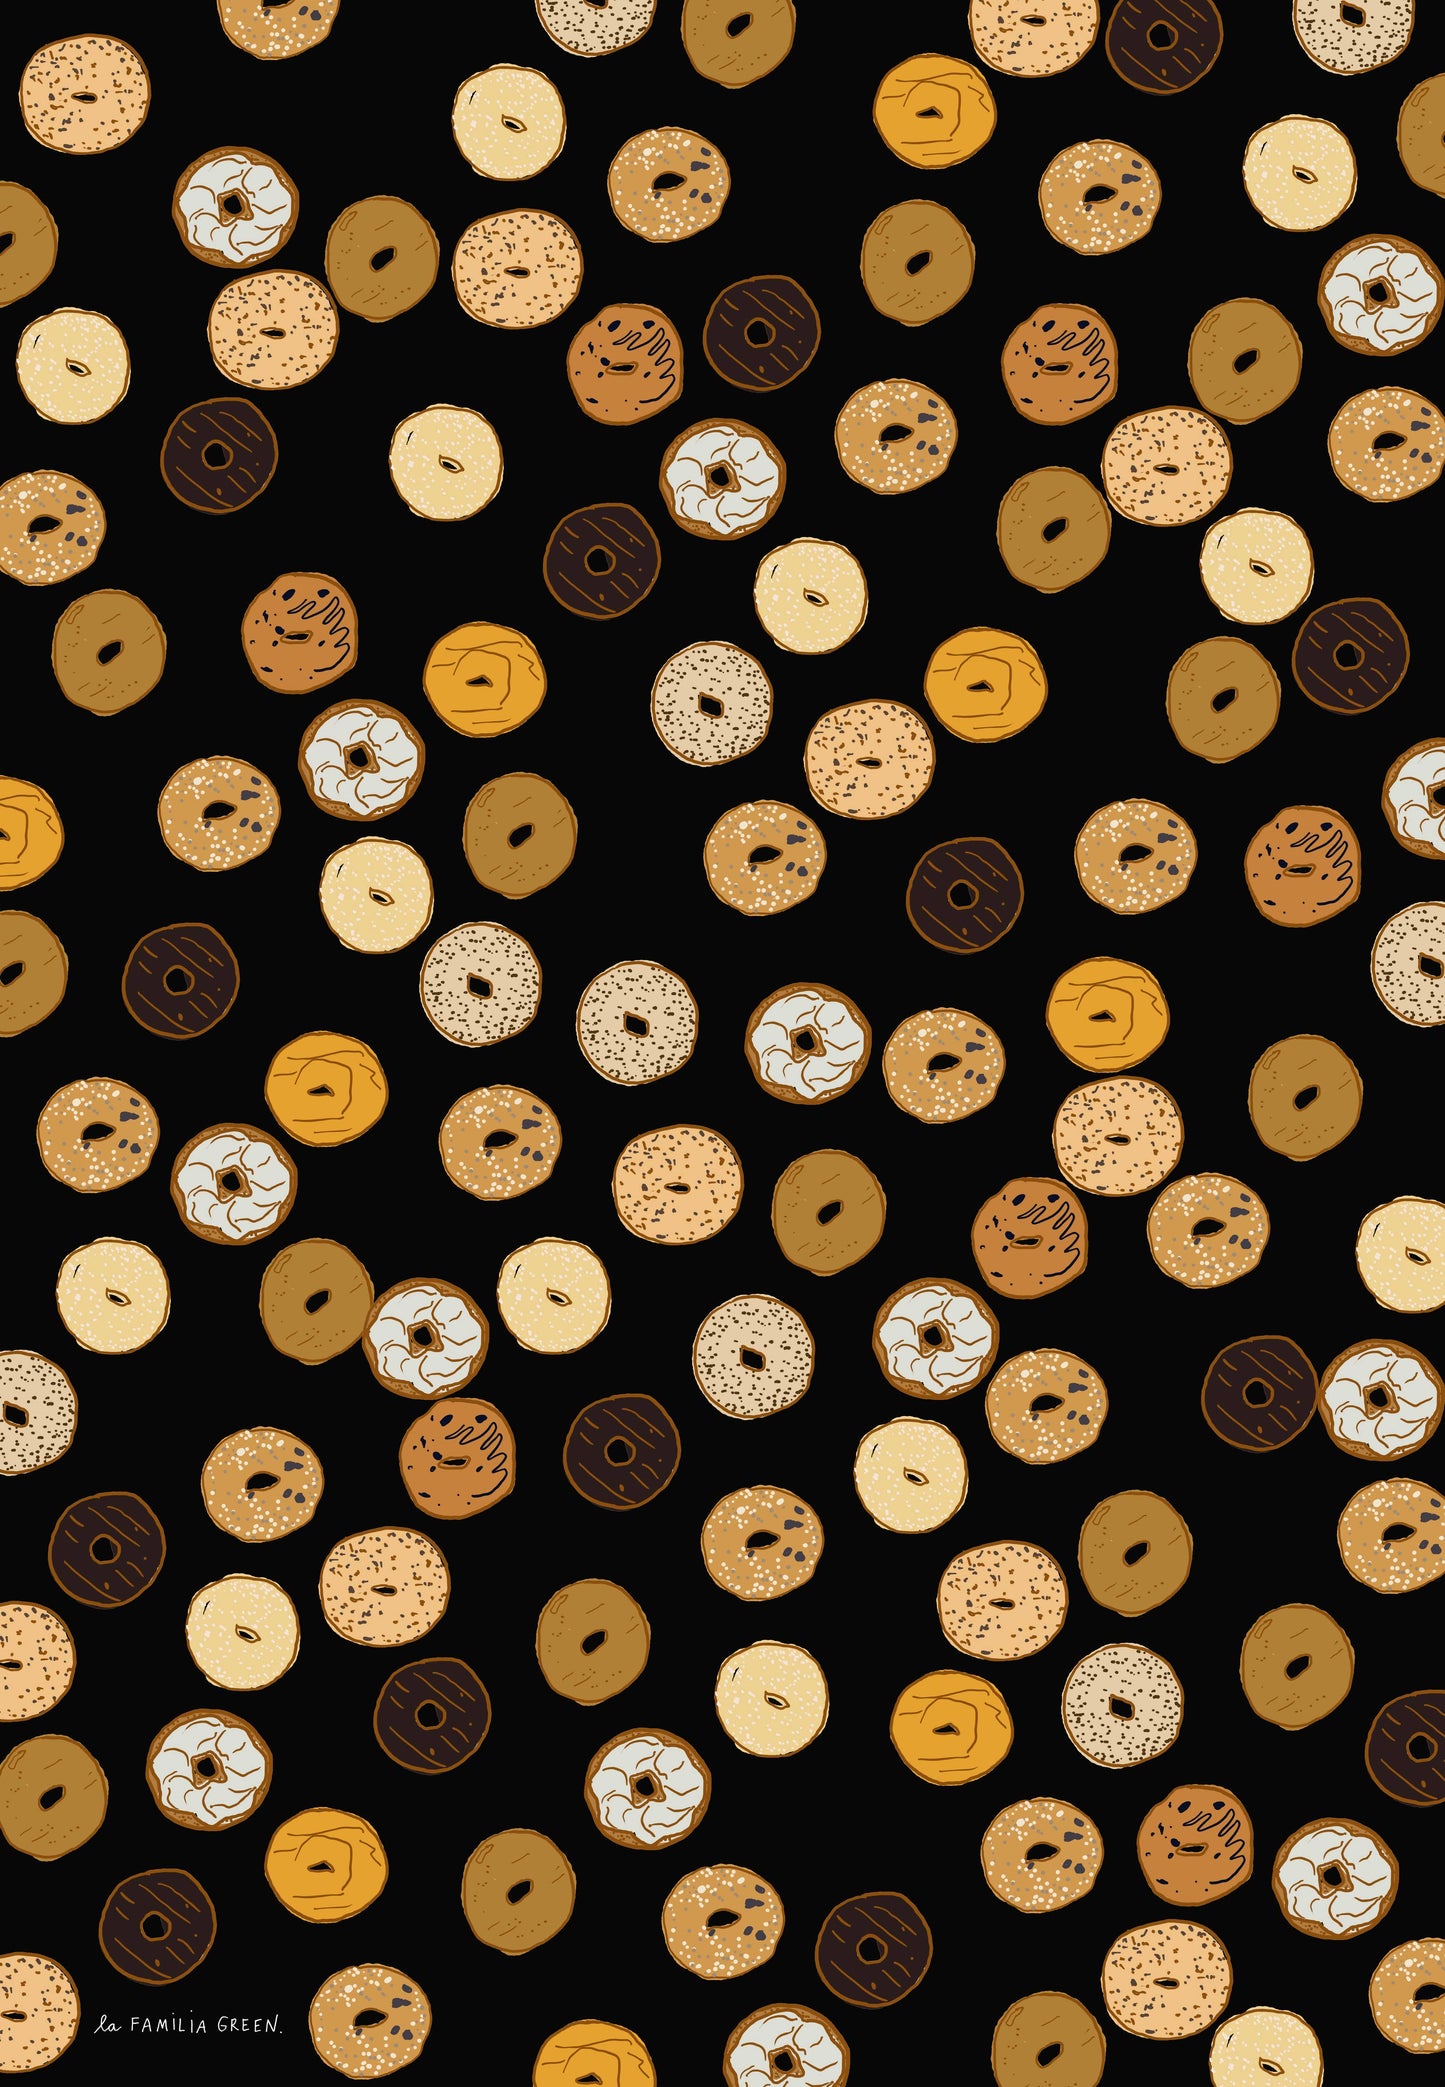 assorted bagels on a black background. This is a sheet of wrapping paper with the signature La Familia Green on the bottom.